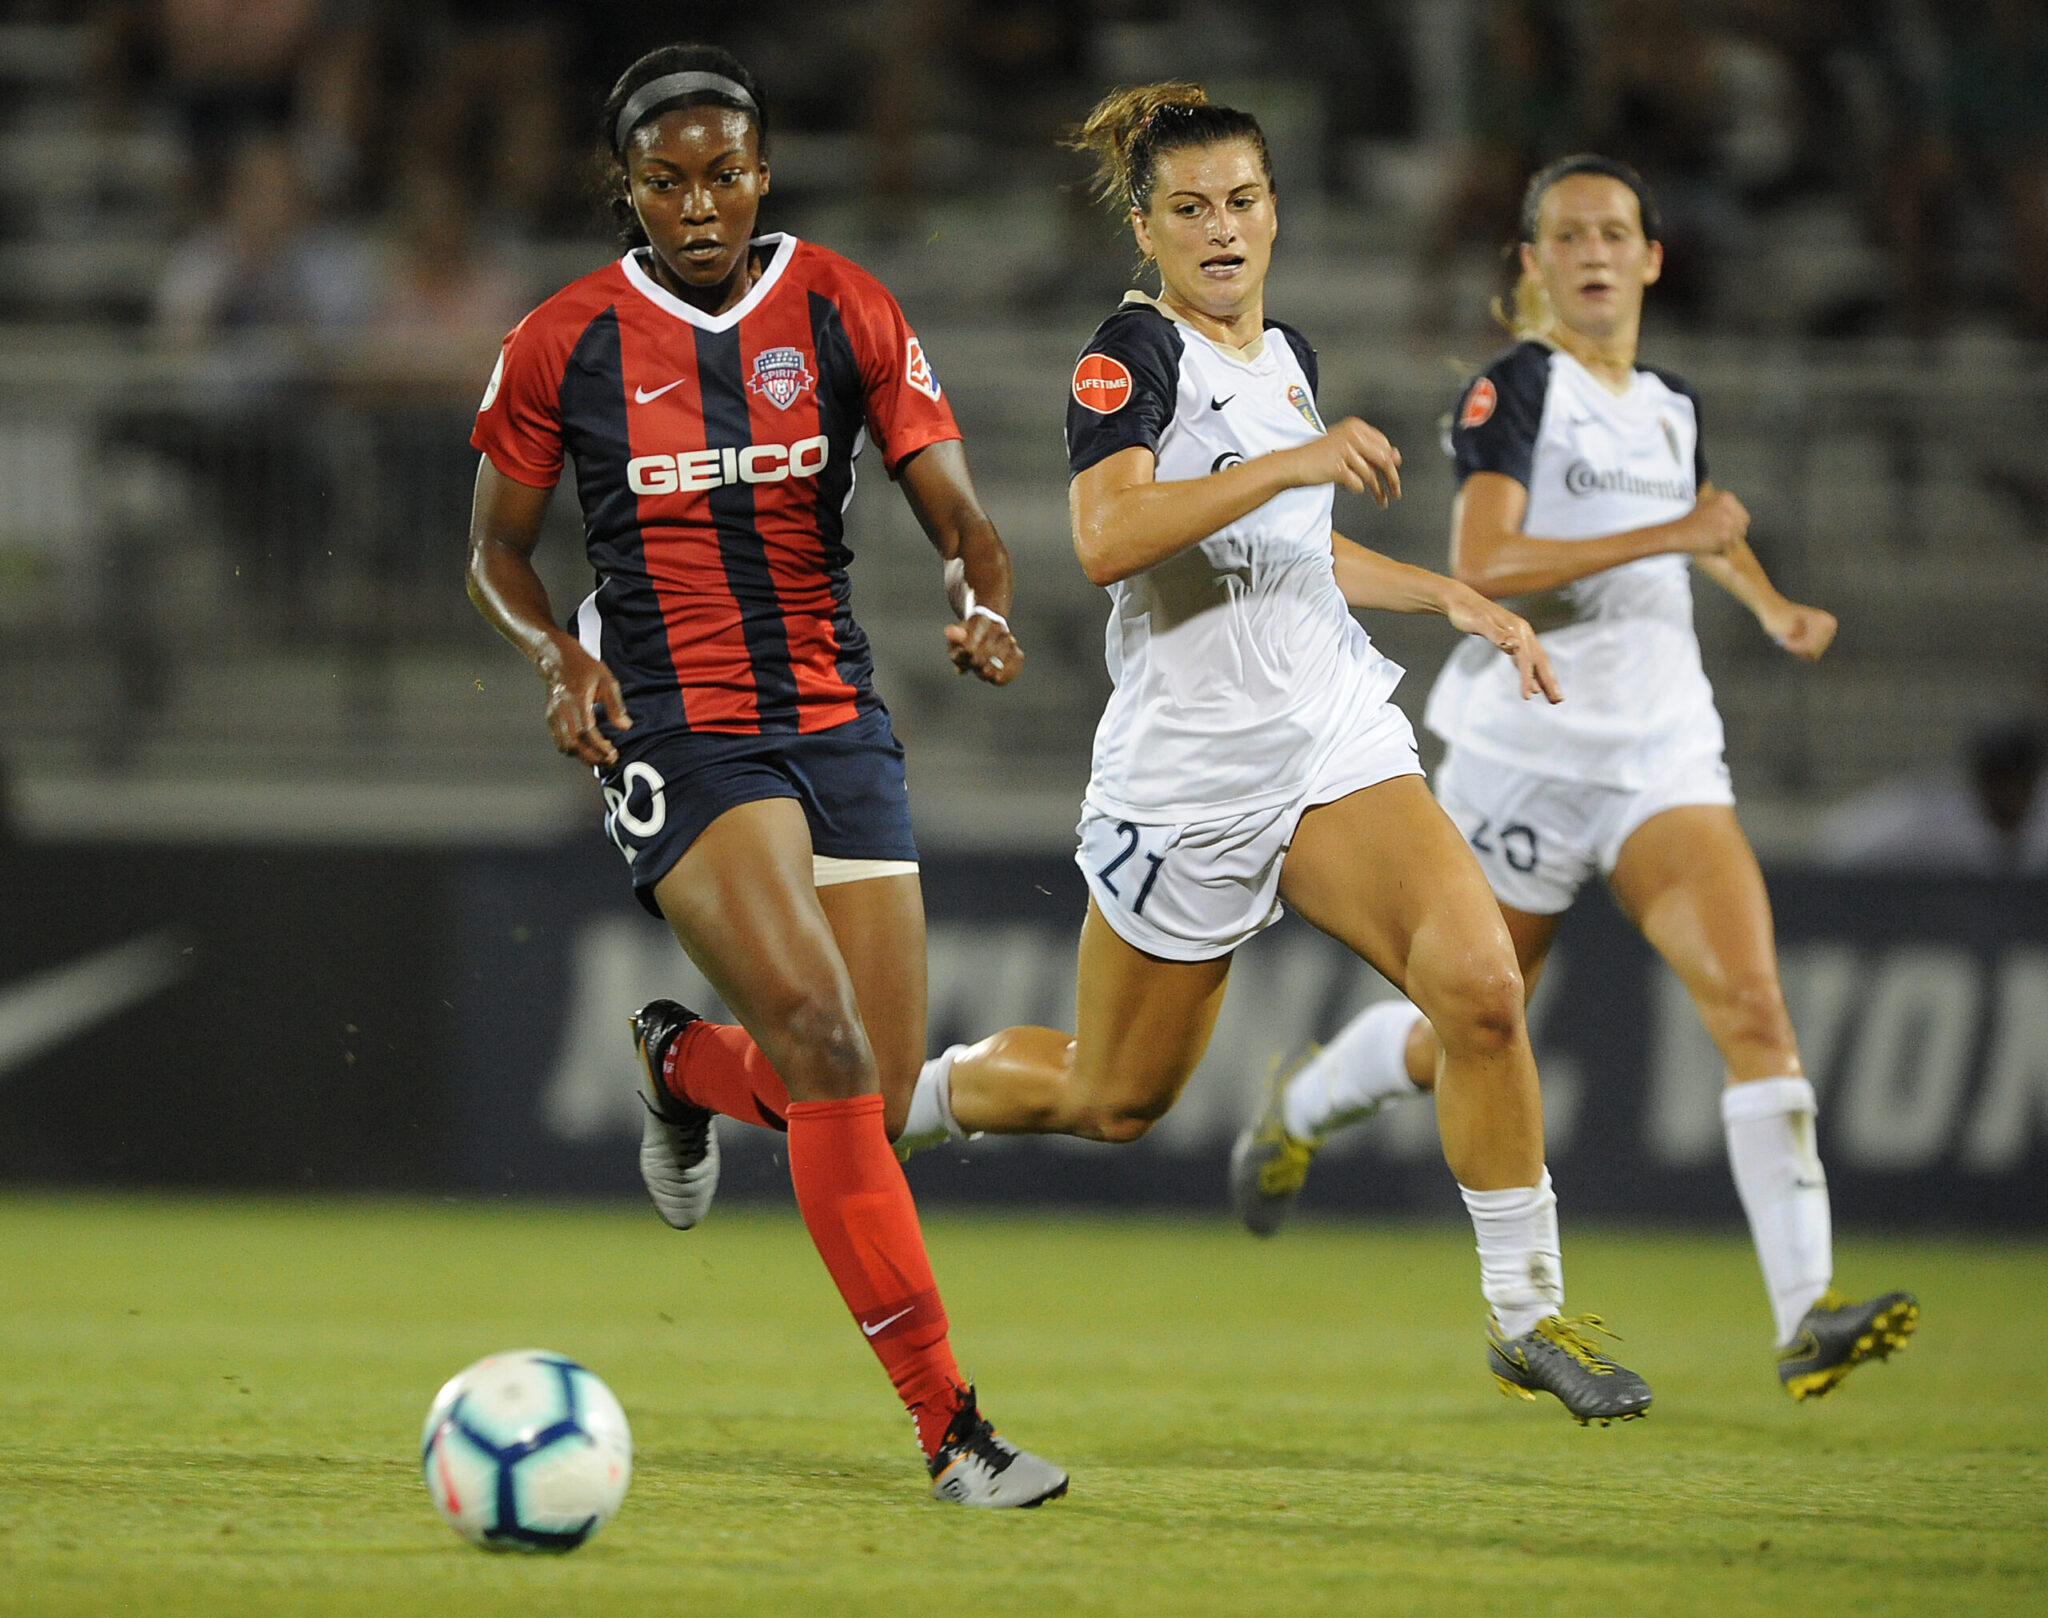 By the Numbers: Top Spirit stats to know ahead of #NCvWAS Featured Image